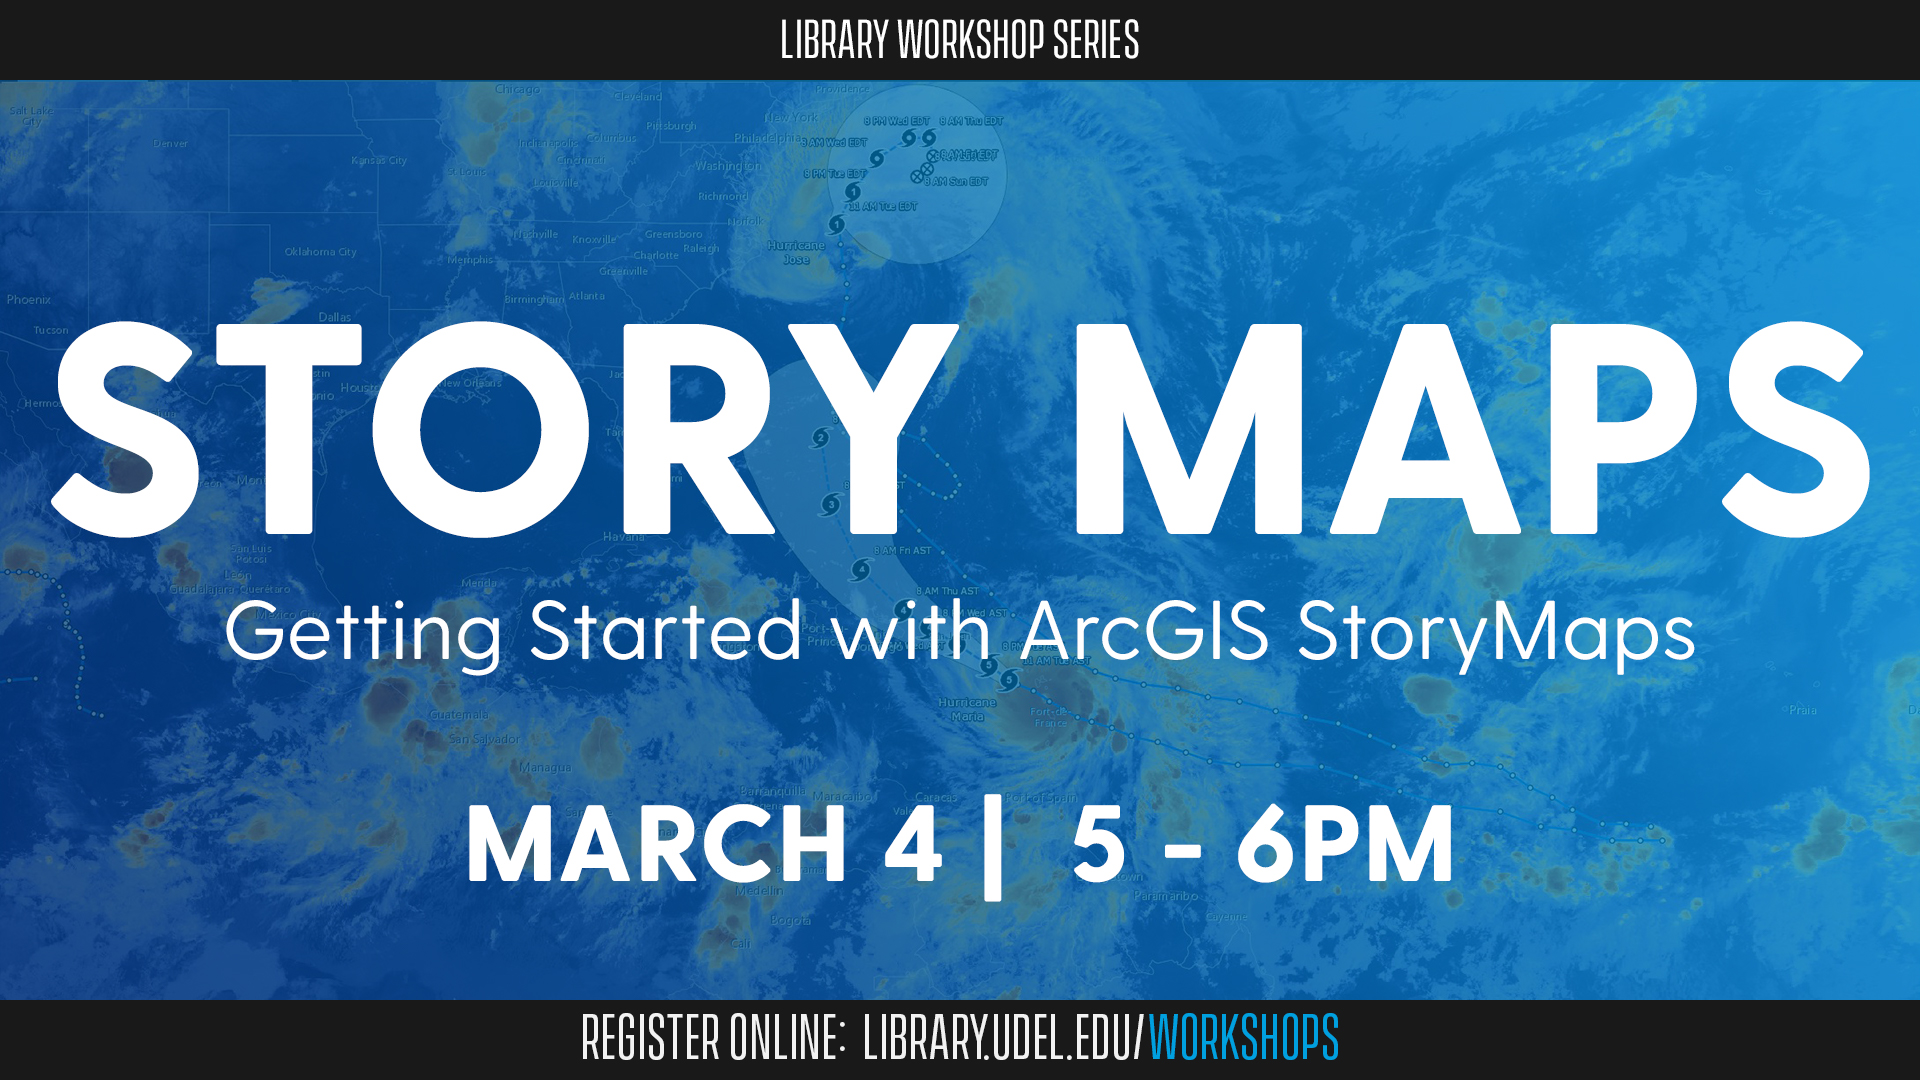 Promotional image for Getting Started with ArcGIS StoryMaps